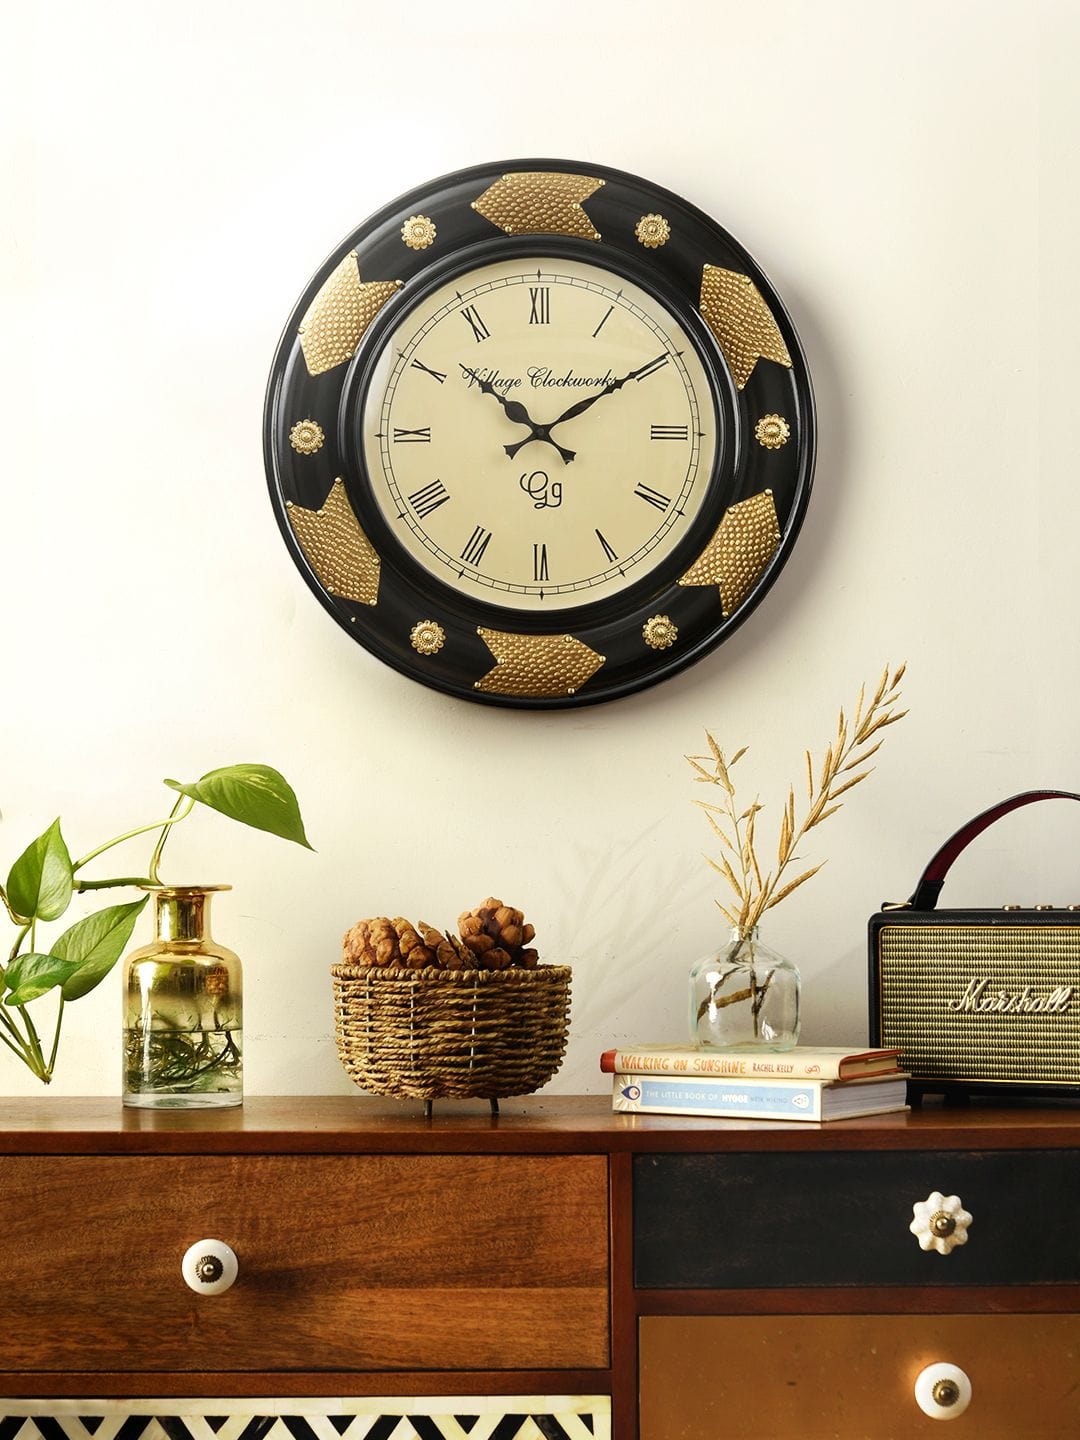 Buy Lazy Duke Mumbai 08 Bombay Love City of Gold Black White Dial Printed  10 Wall Clock Online at Low Prices in India 